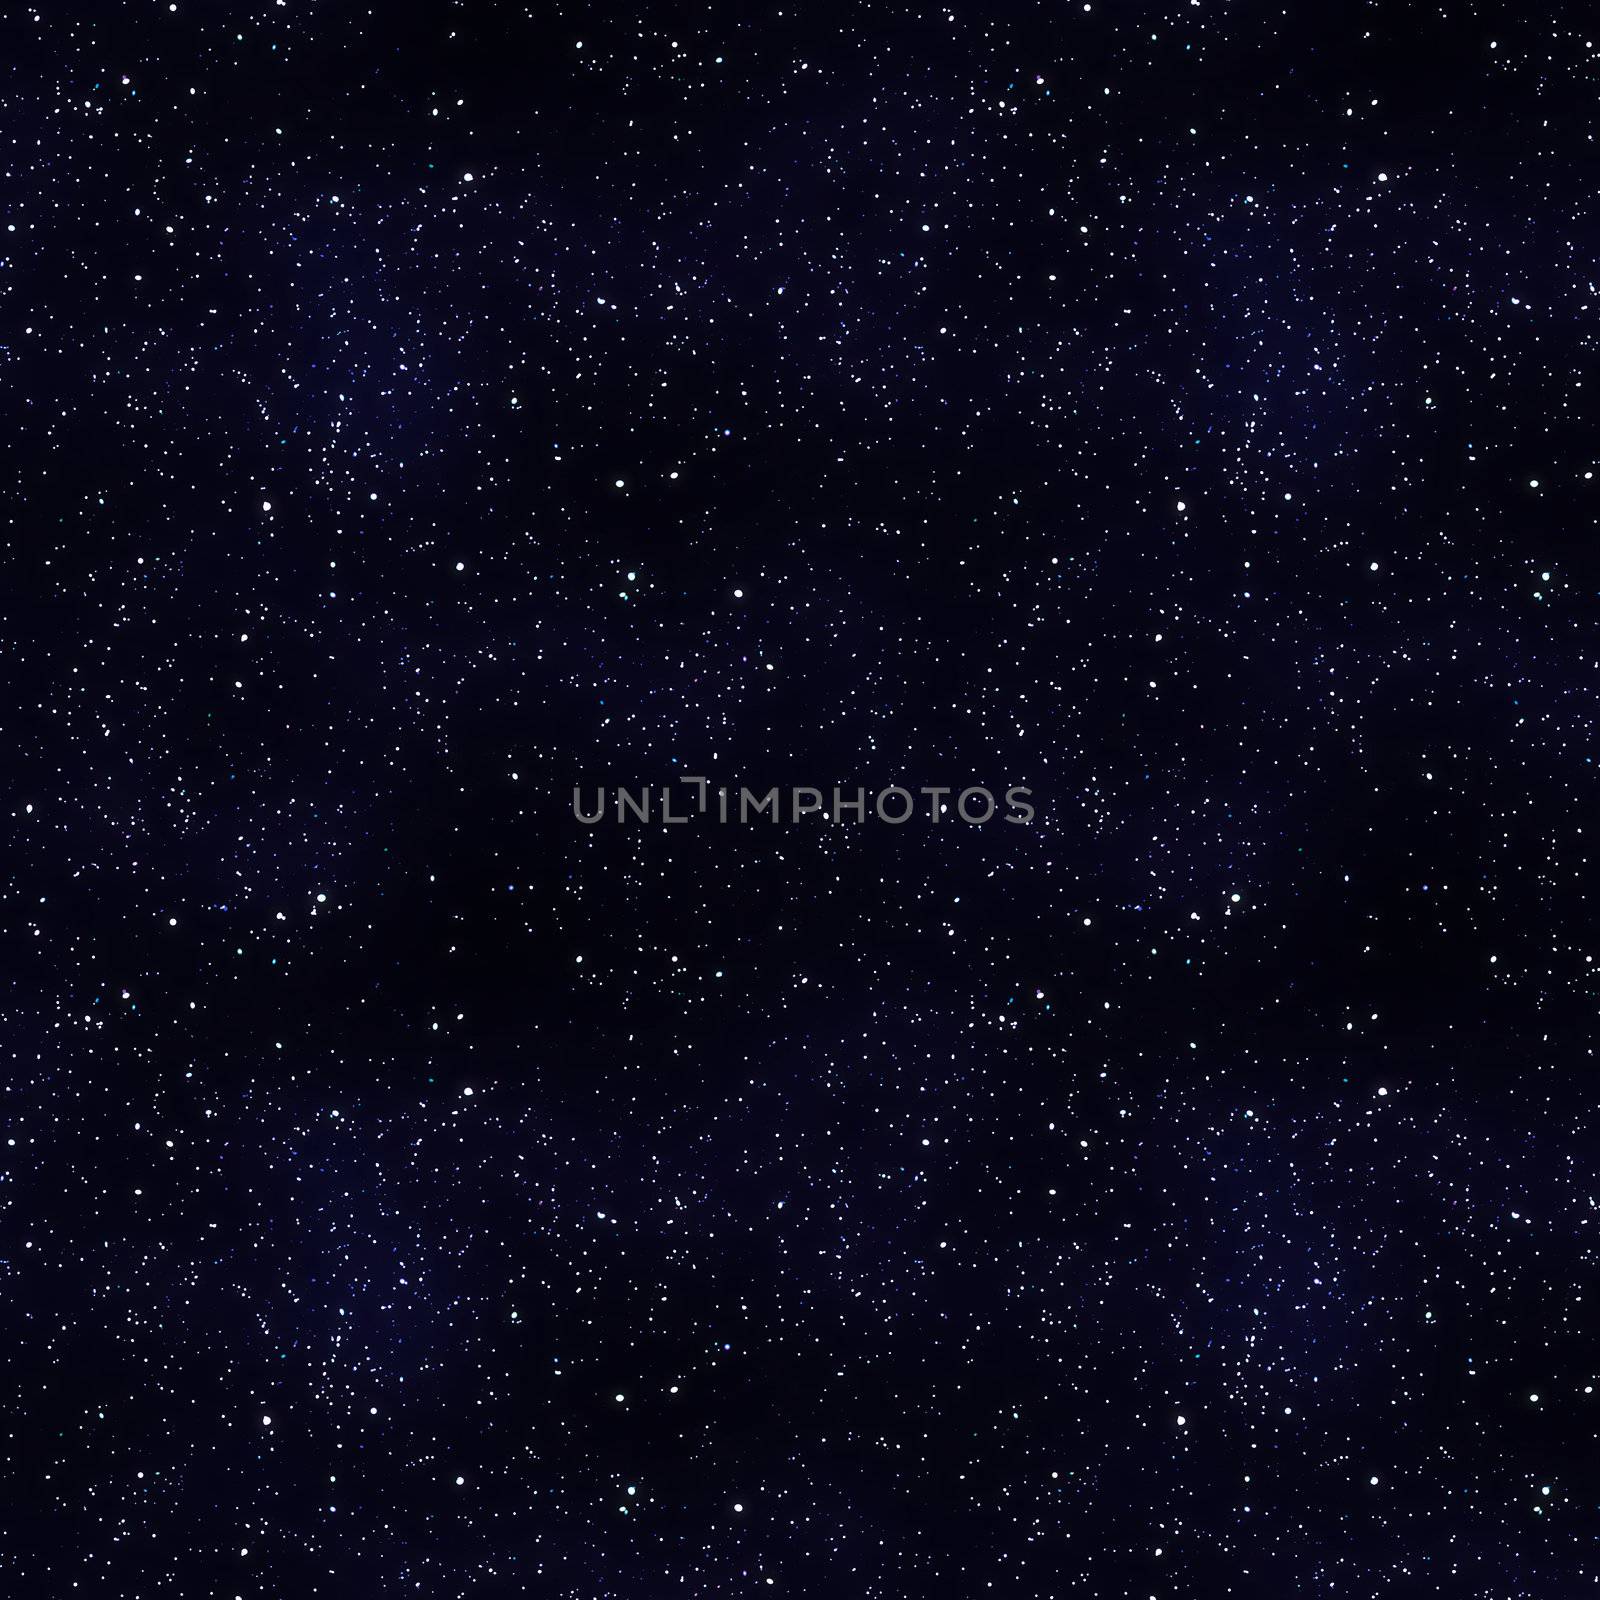 An image of a nice starfield background